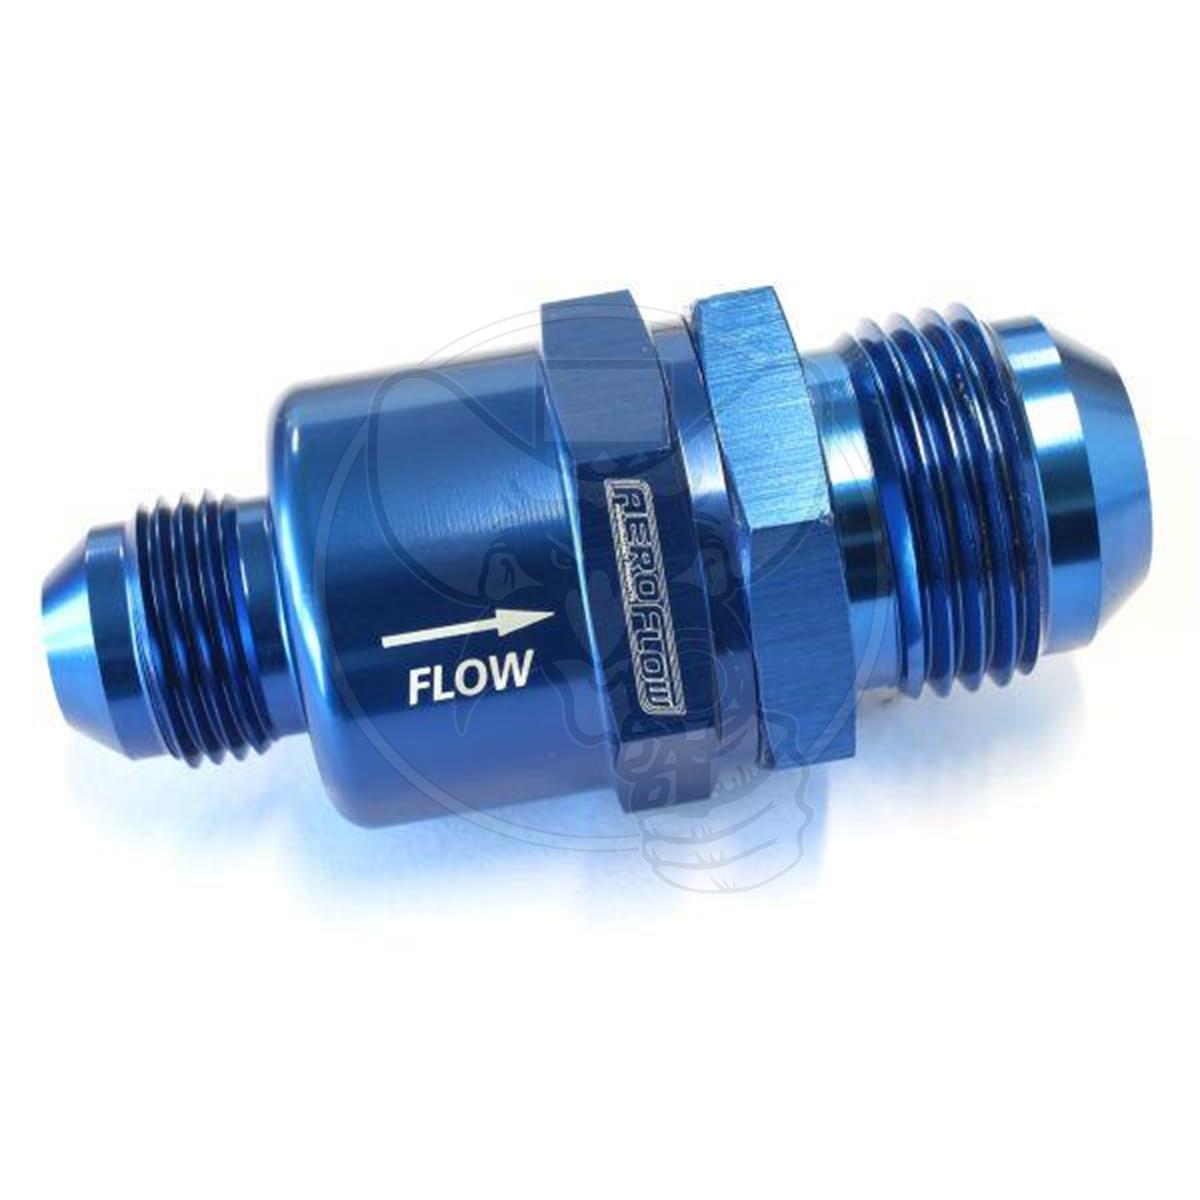 AEROFLOW 1-WAY STEPPED CHECK VALVE -12 TO -8AN BLUE FINISH